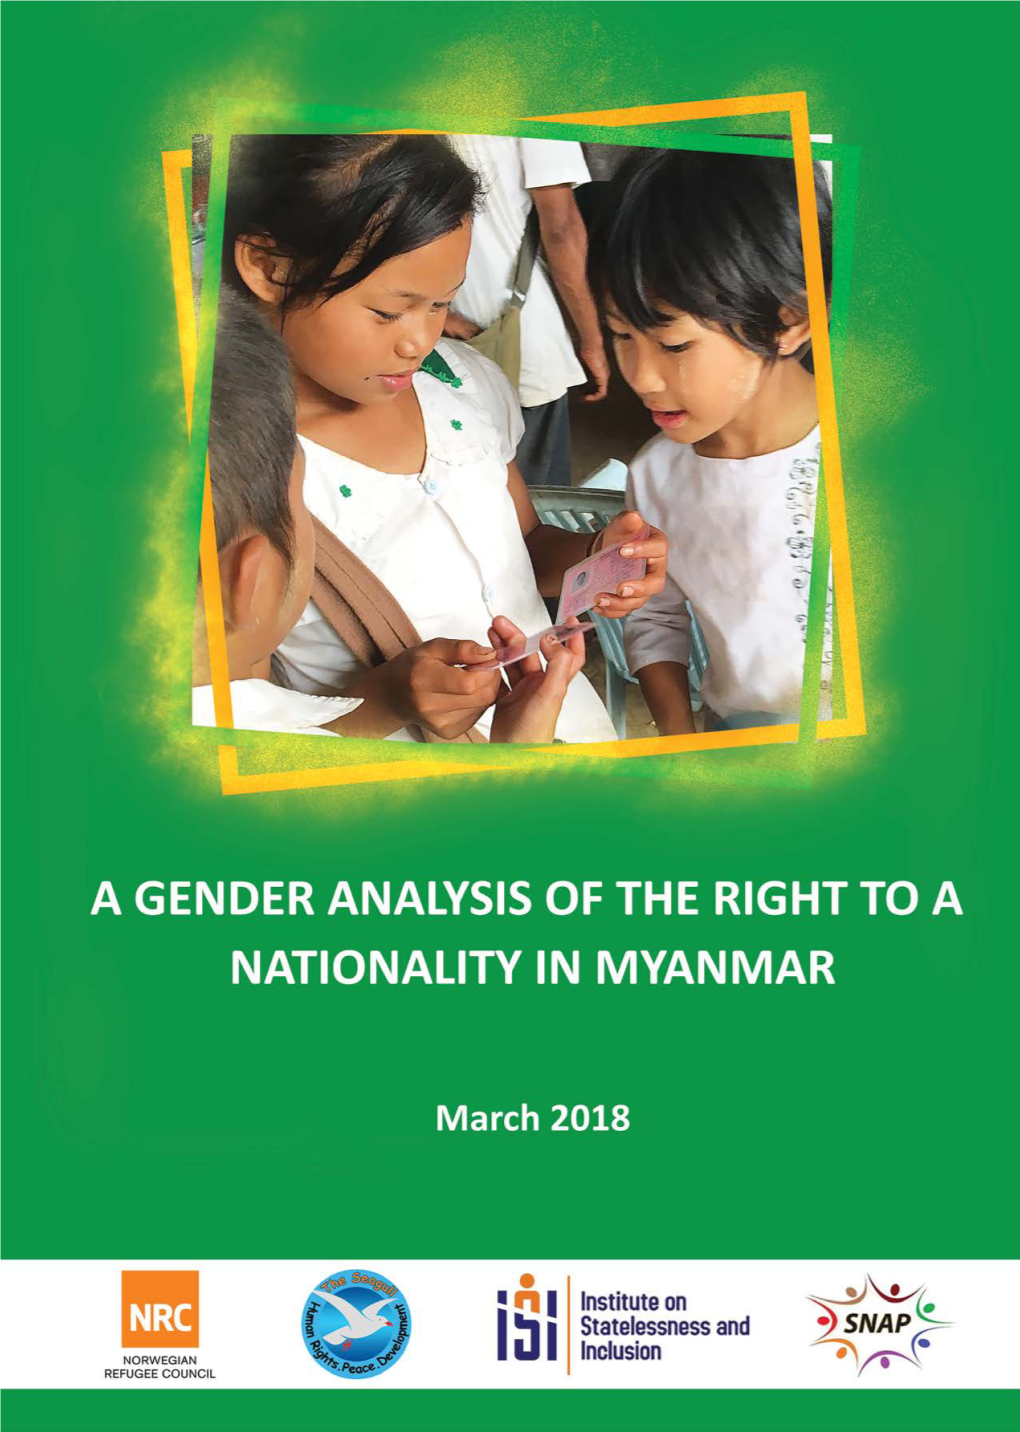 An Analysis of the Right to a Nationality in Myanmar